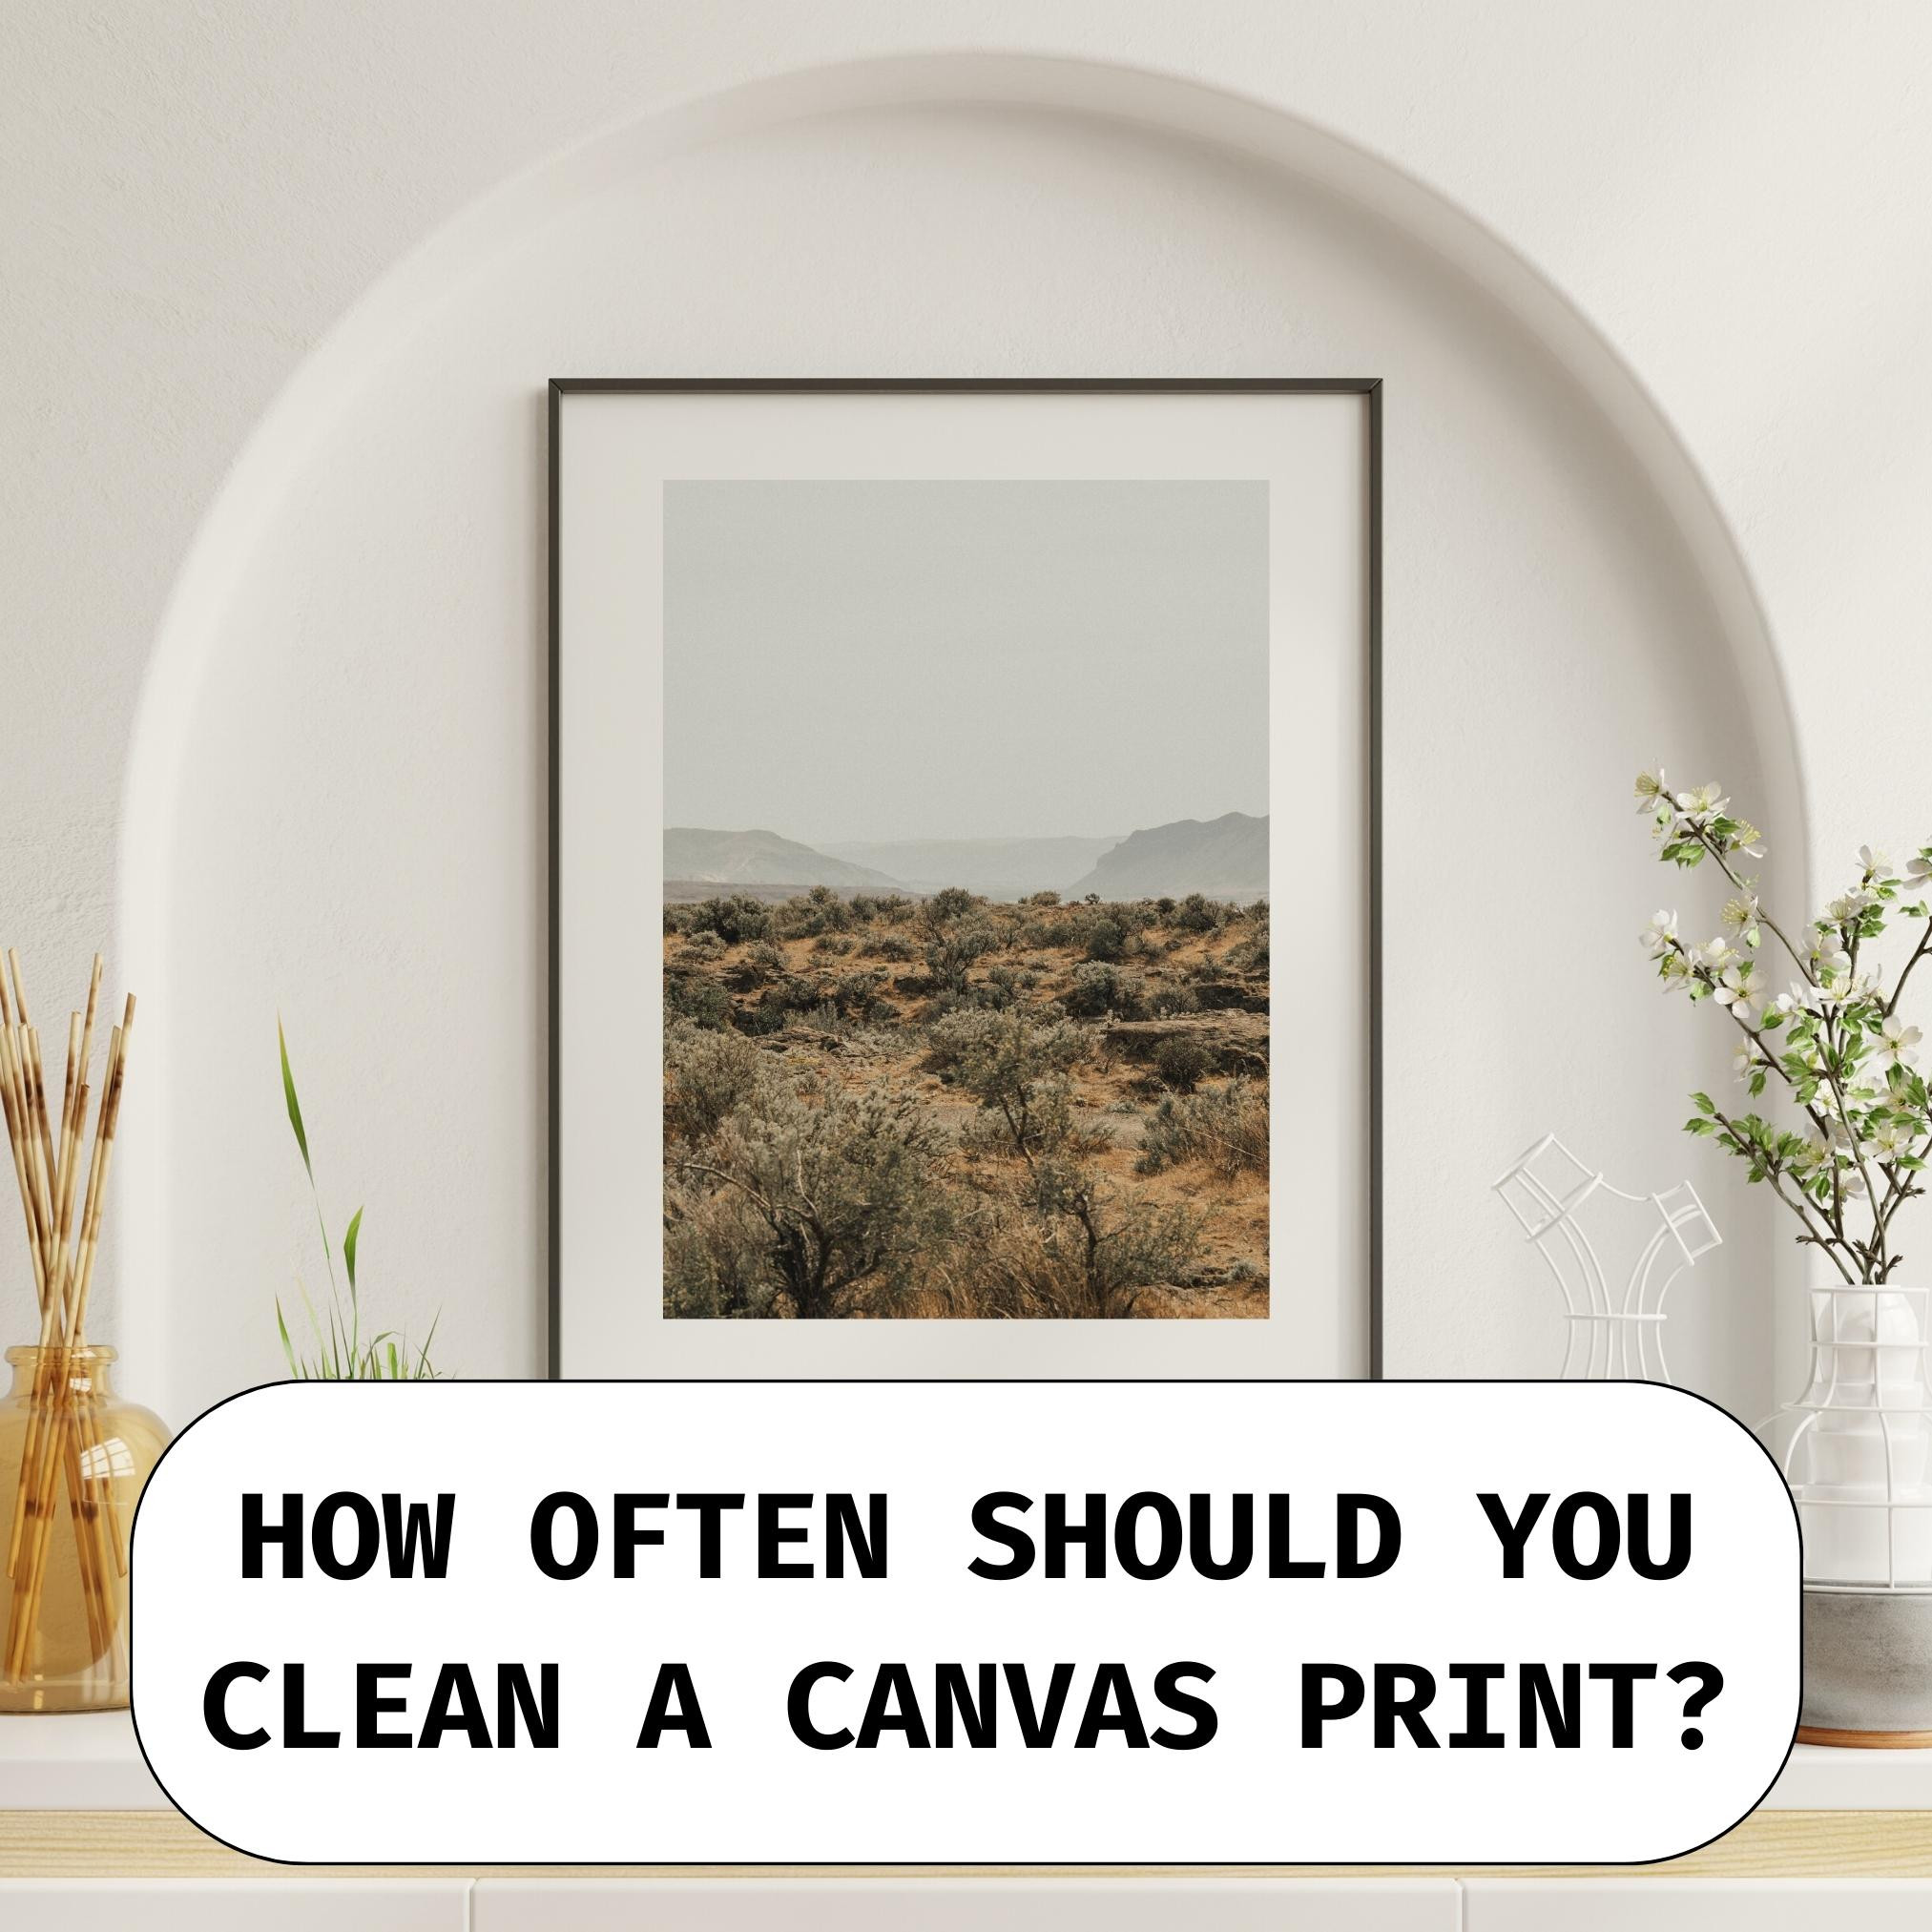 How Often Should You Clean a Canvas Print